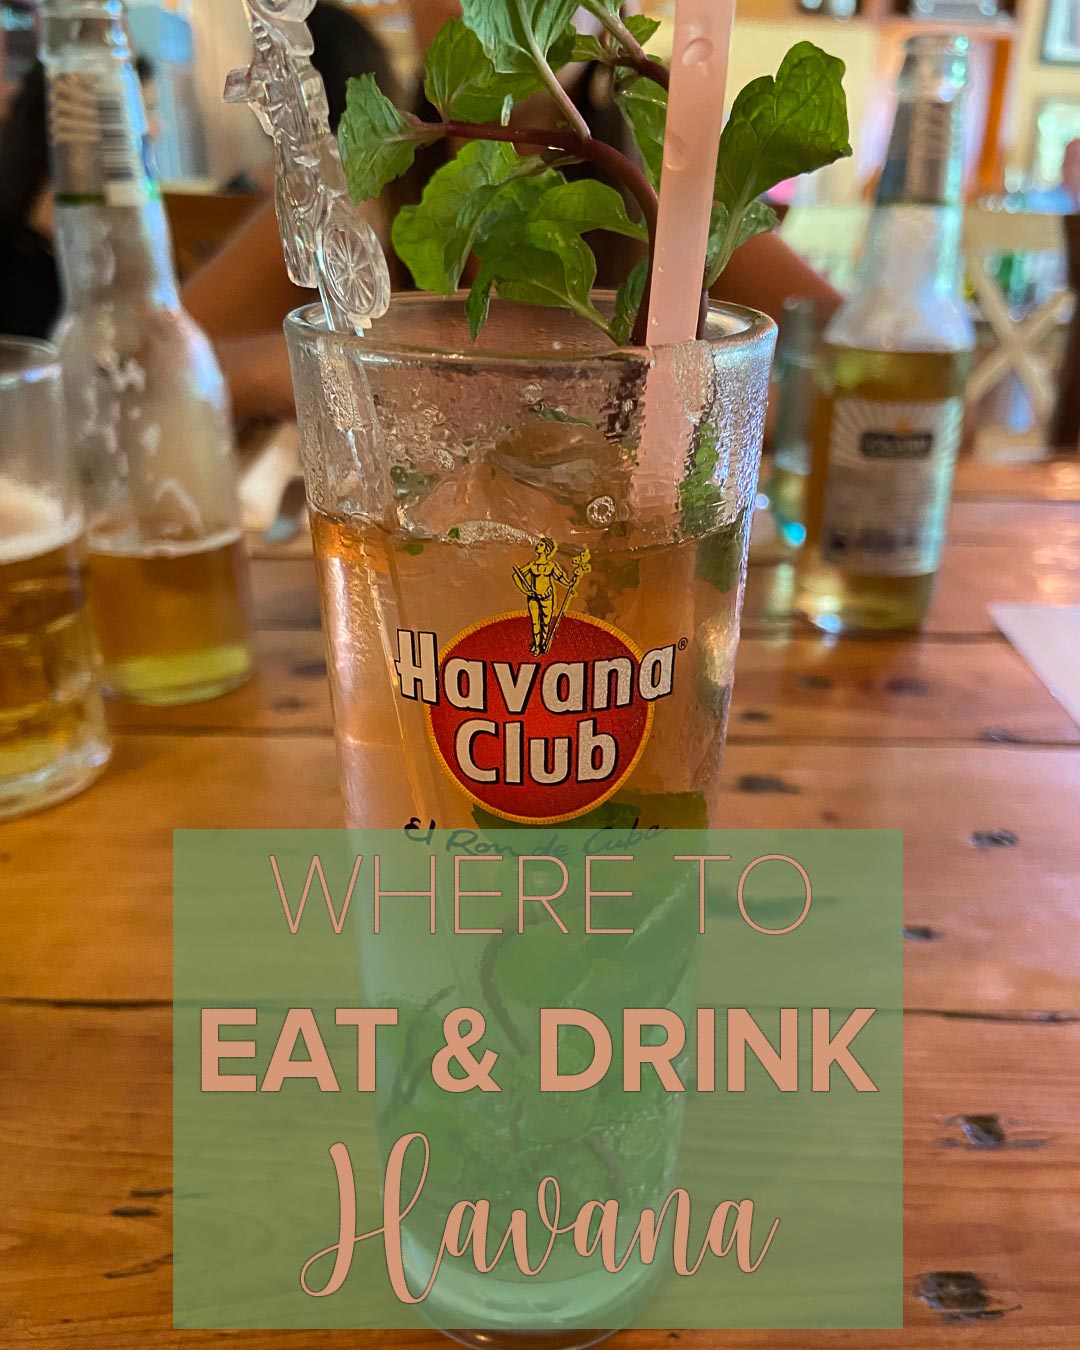 where to eat & drink in havana